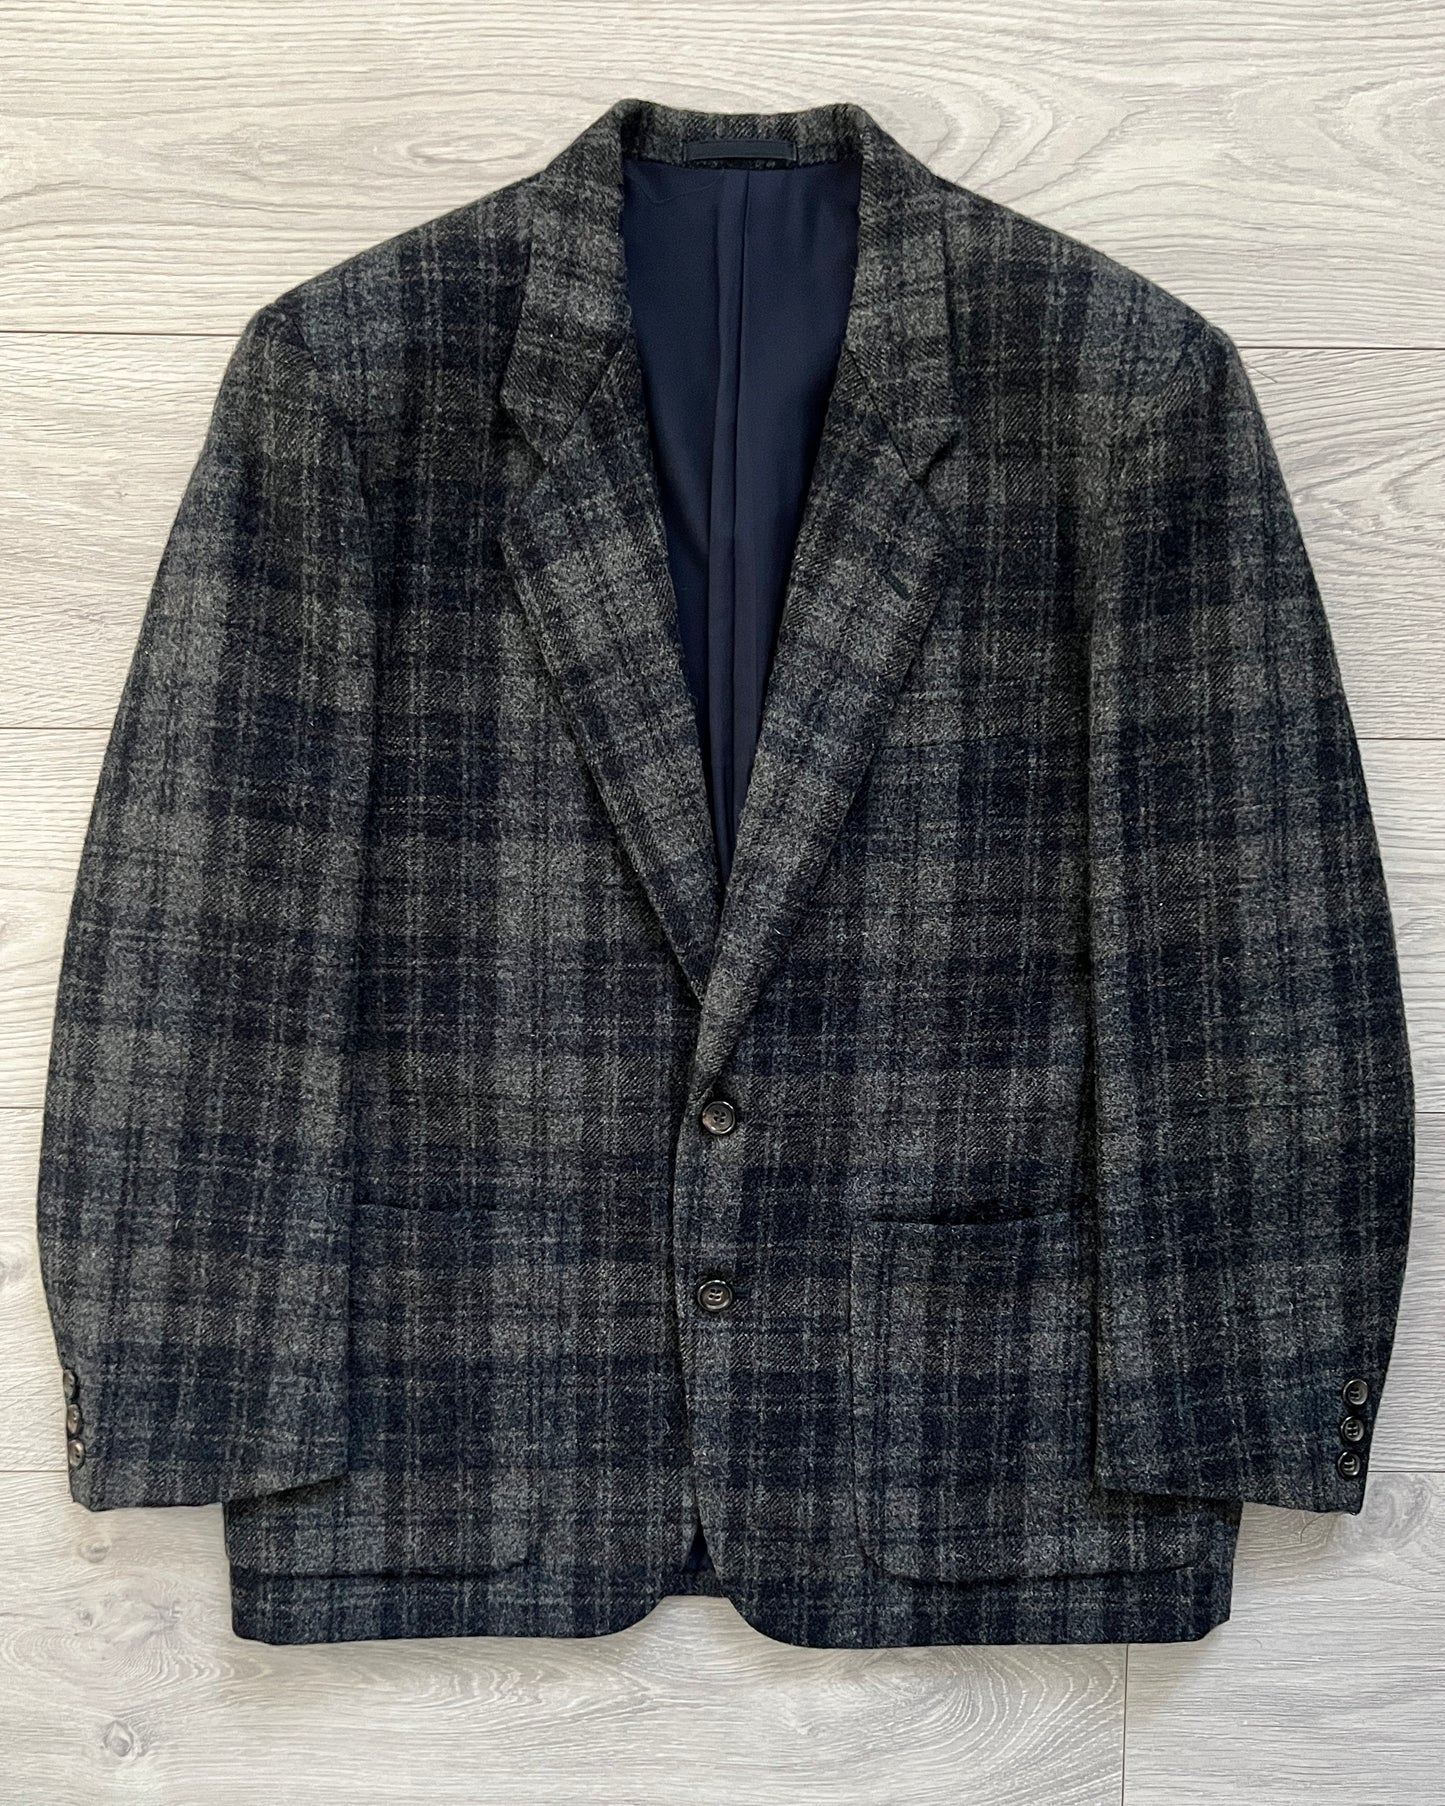 Comme Des Garcons Homme 1990s Thick Wool Pleated Suit - Size S/30